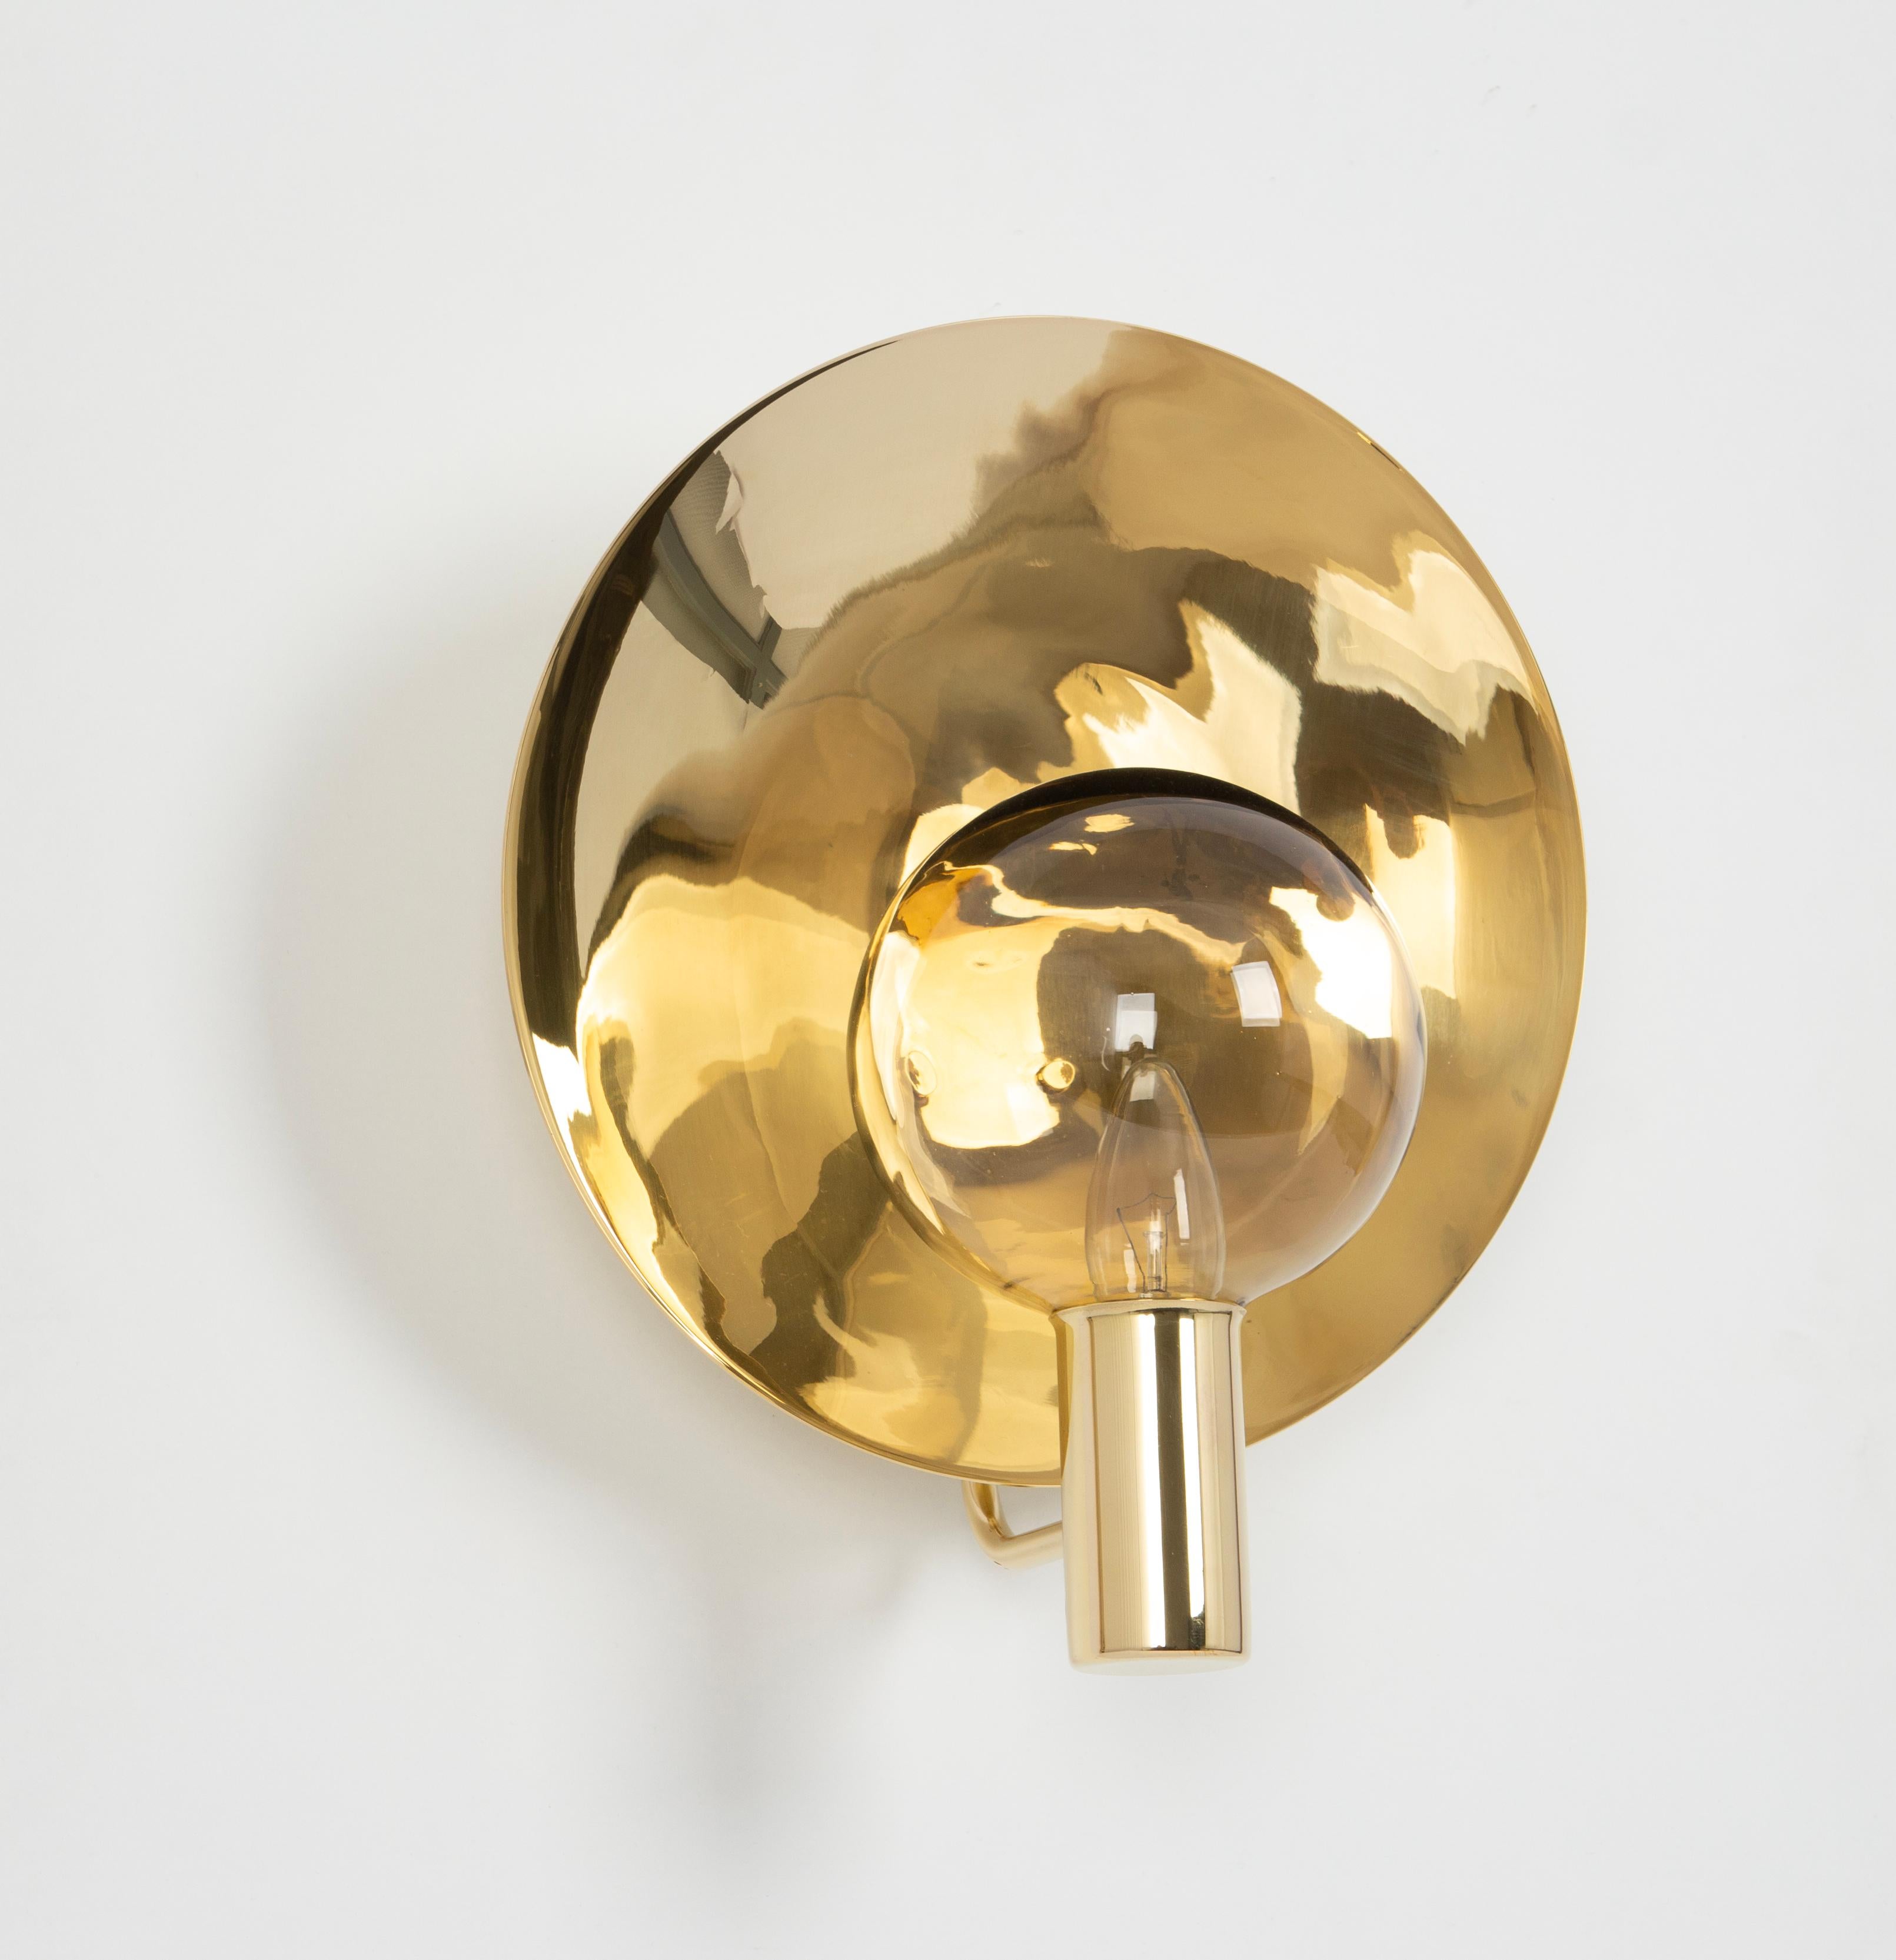 Mid-Century Modern Stunning Large Brass and Smoke Glass Sconce, Hans Agne jakobsson, Sweden, 1970s For Sale